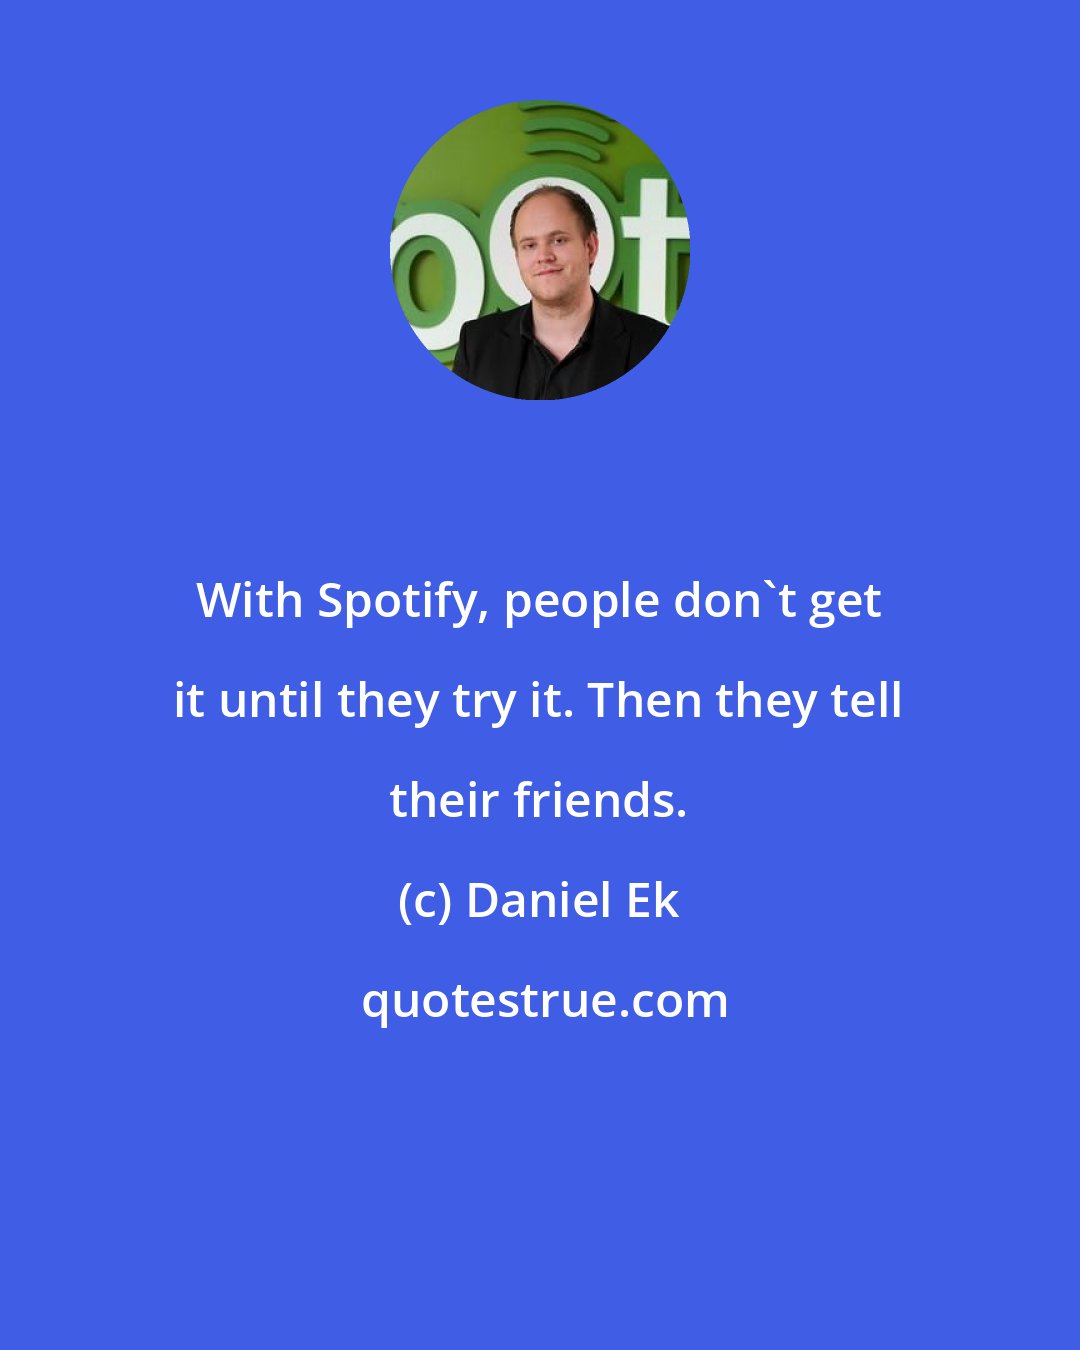 Daniel Ek: With Spotify, people don't get it until they try it. Then they tell their friends.